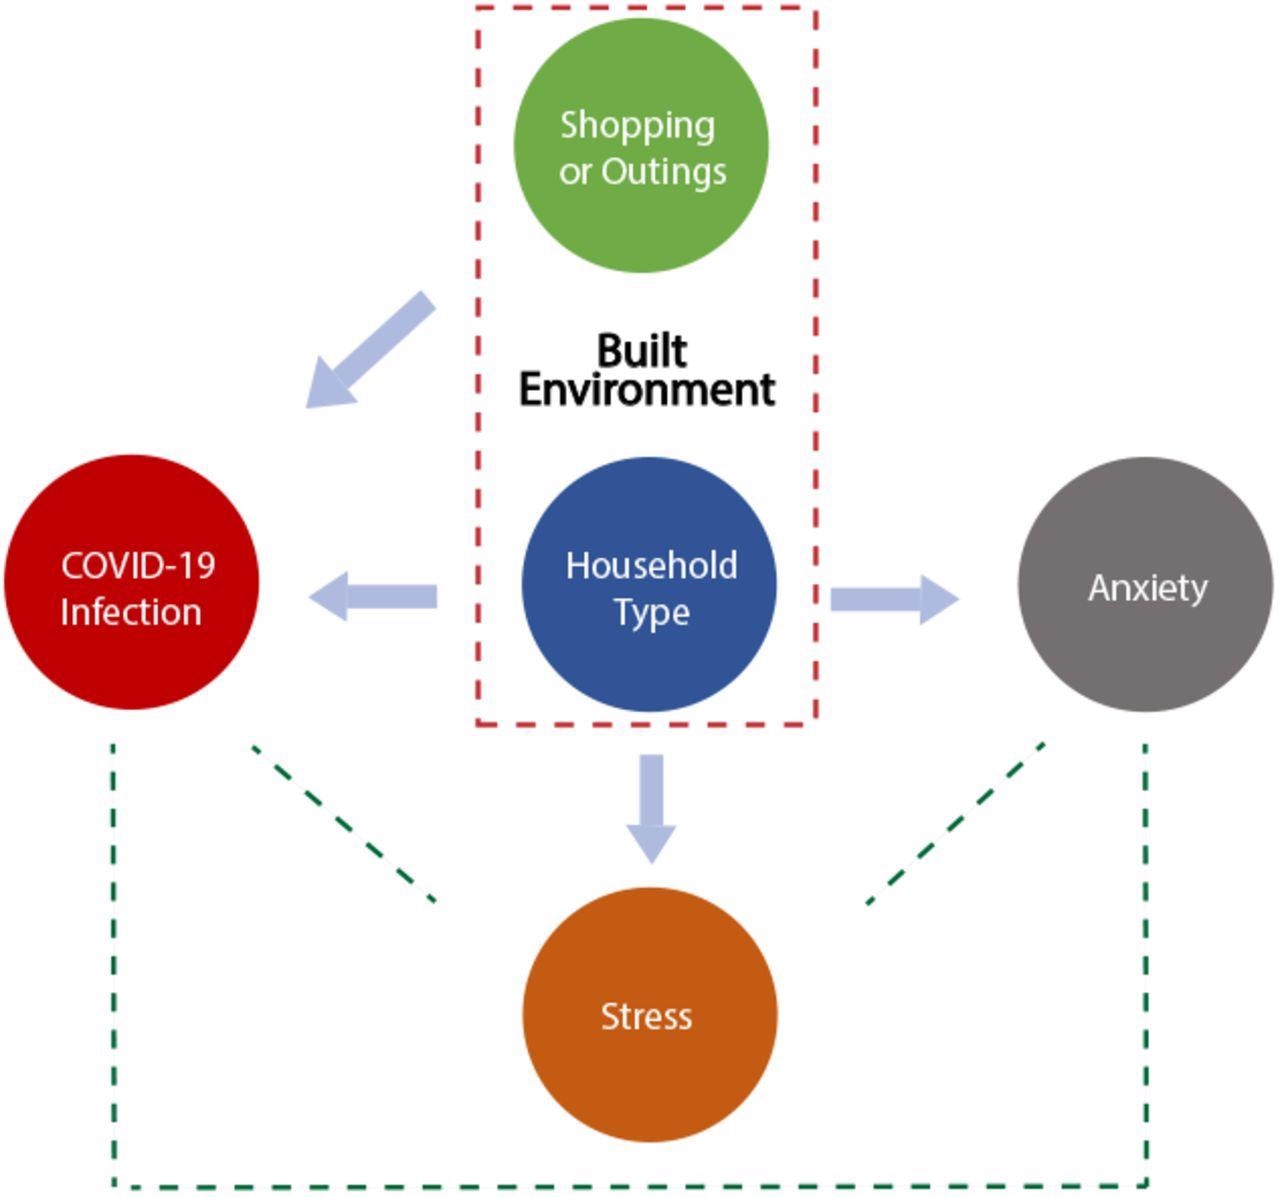 Relationships among the household type, COVID-19 infection, mental health, and non-essential shopping or outings. Arrows indicate associations between the built environment and its impact outcomes, while dotted lines show the confounding associations among the outcomes.